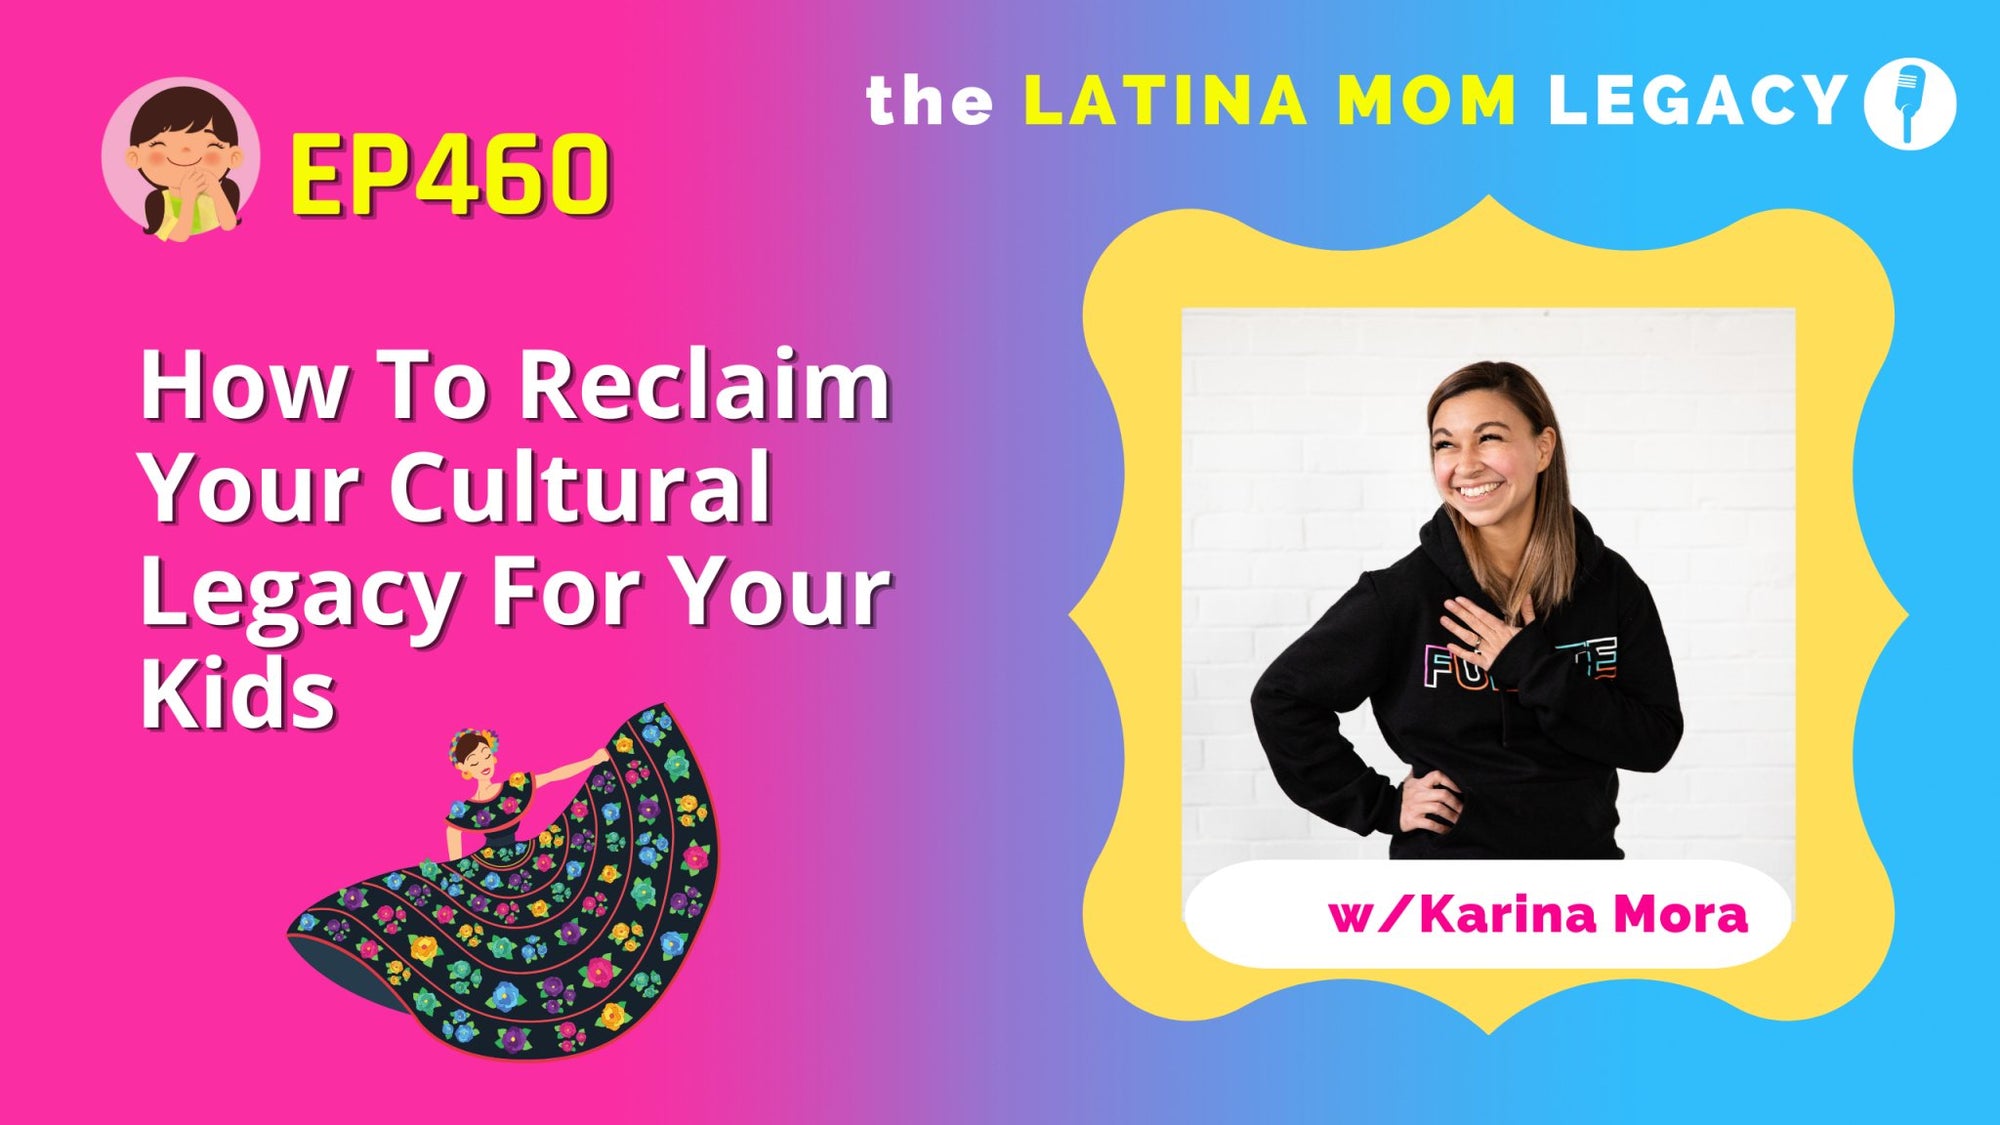 460 Karina Mora - How to Reclaim Your Cultural Legacy For Your Kids - Mi LegaSi